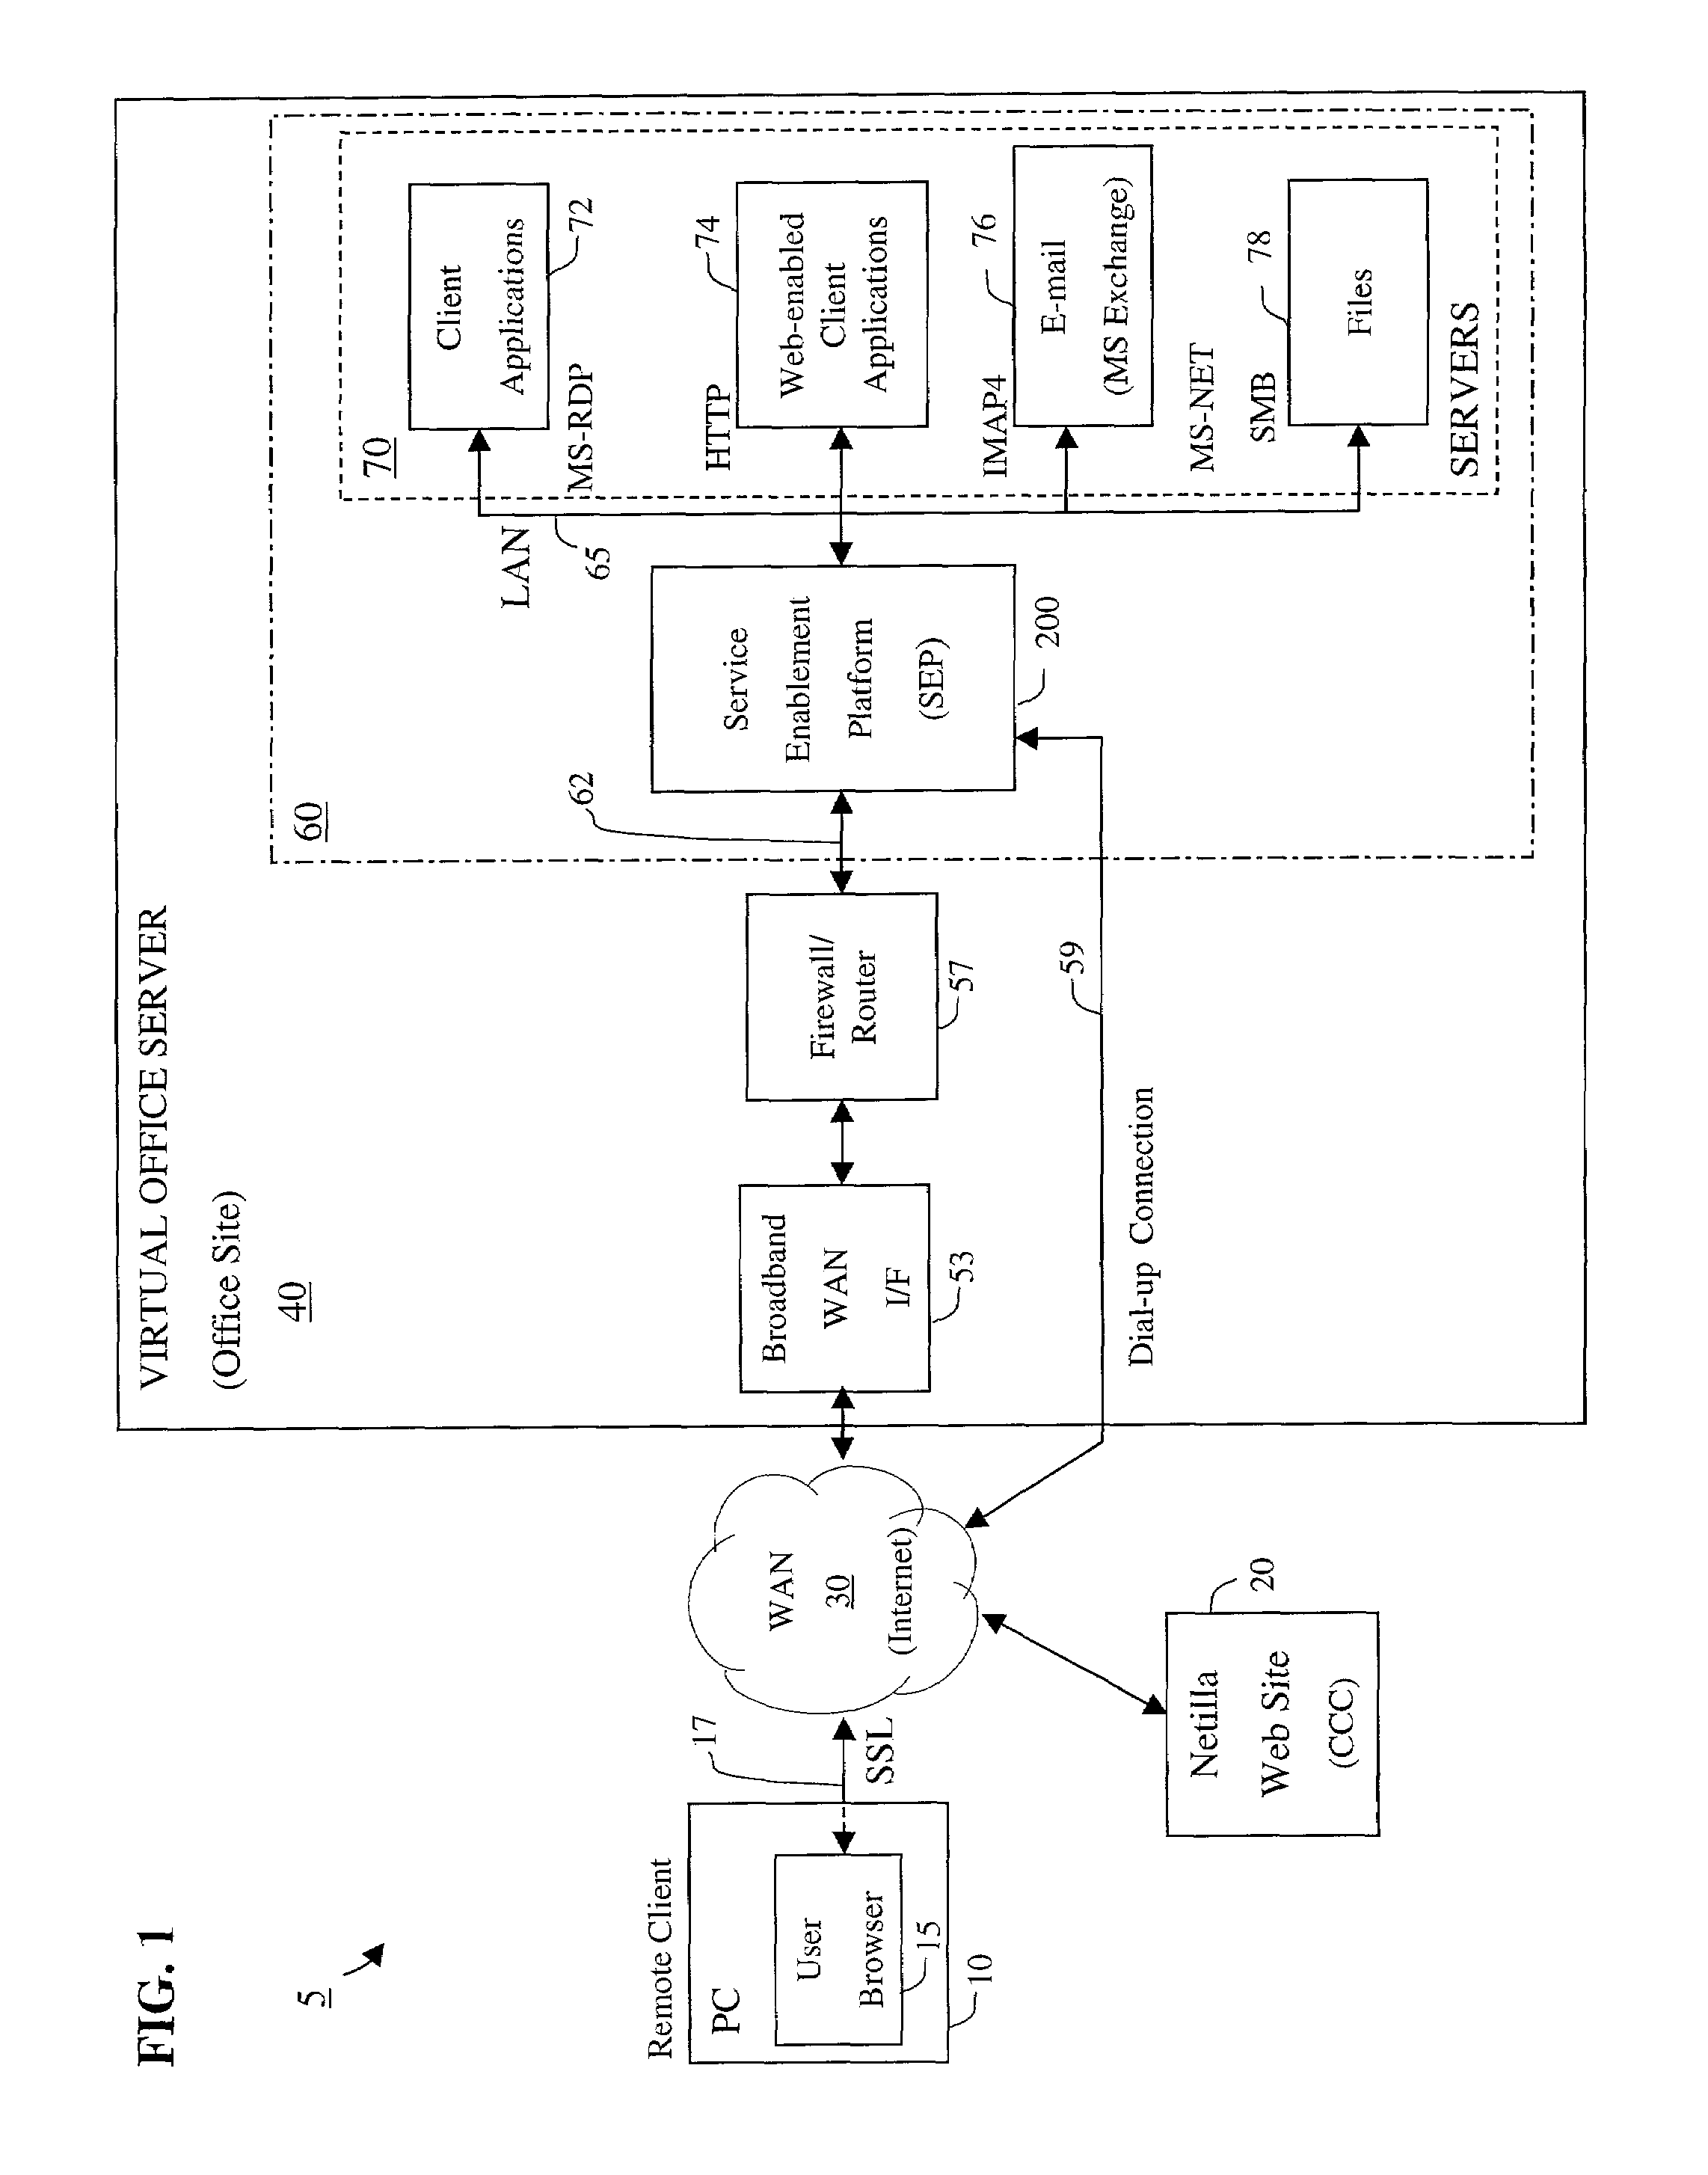 Apparatus and accompanying methods for providing, through a centralized server site, an integrated virtual office environment, remotely accessible via a network-connected web browser, with remote network monitoring and management capabilities